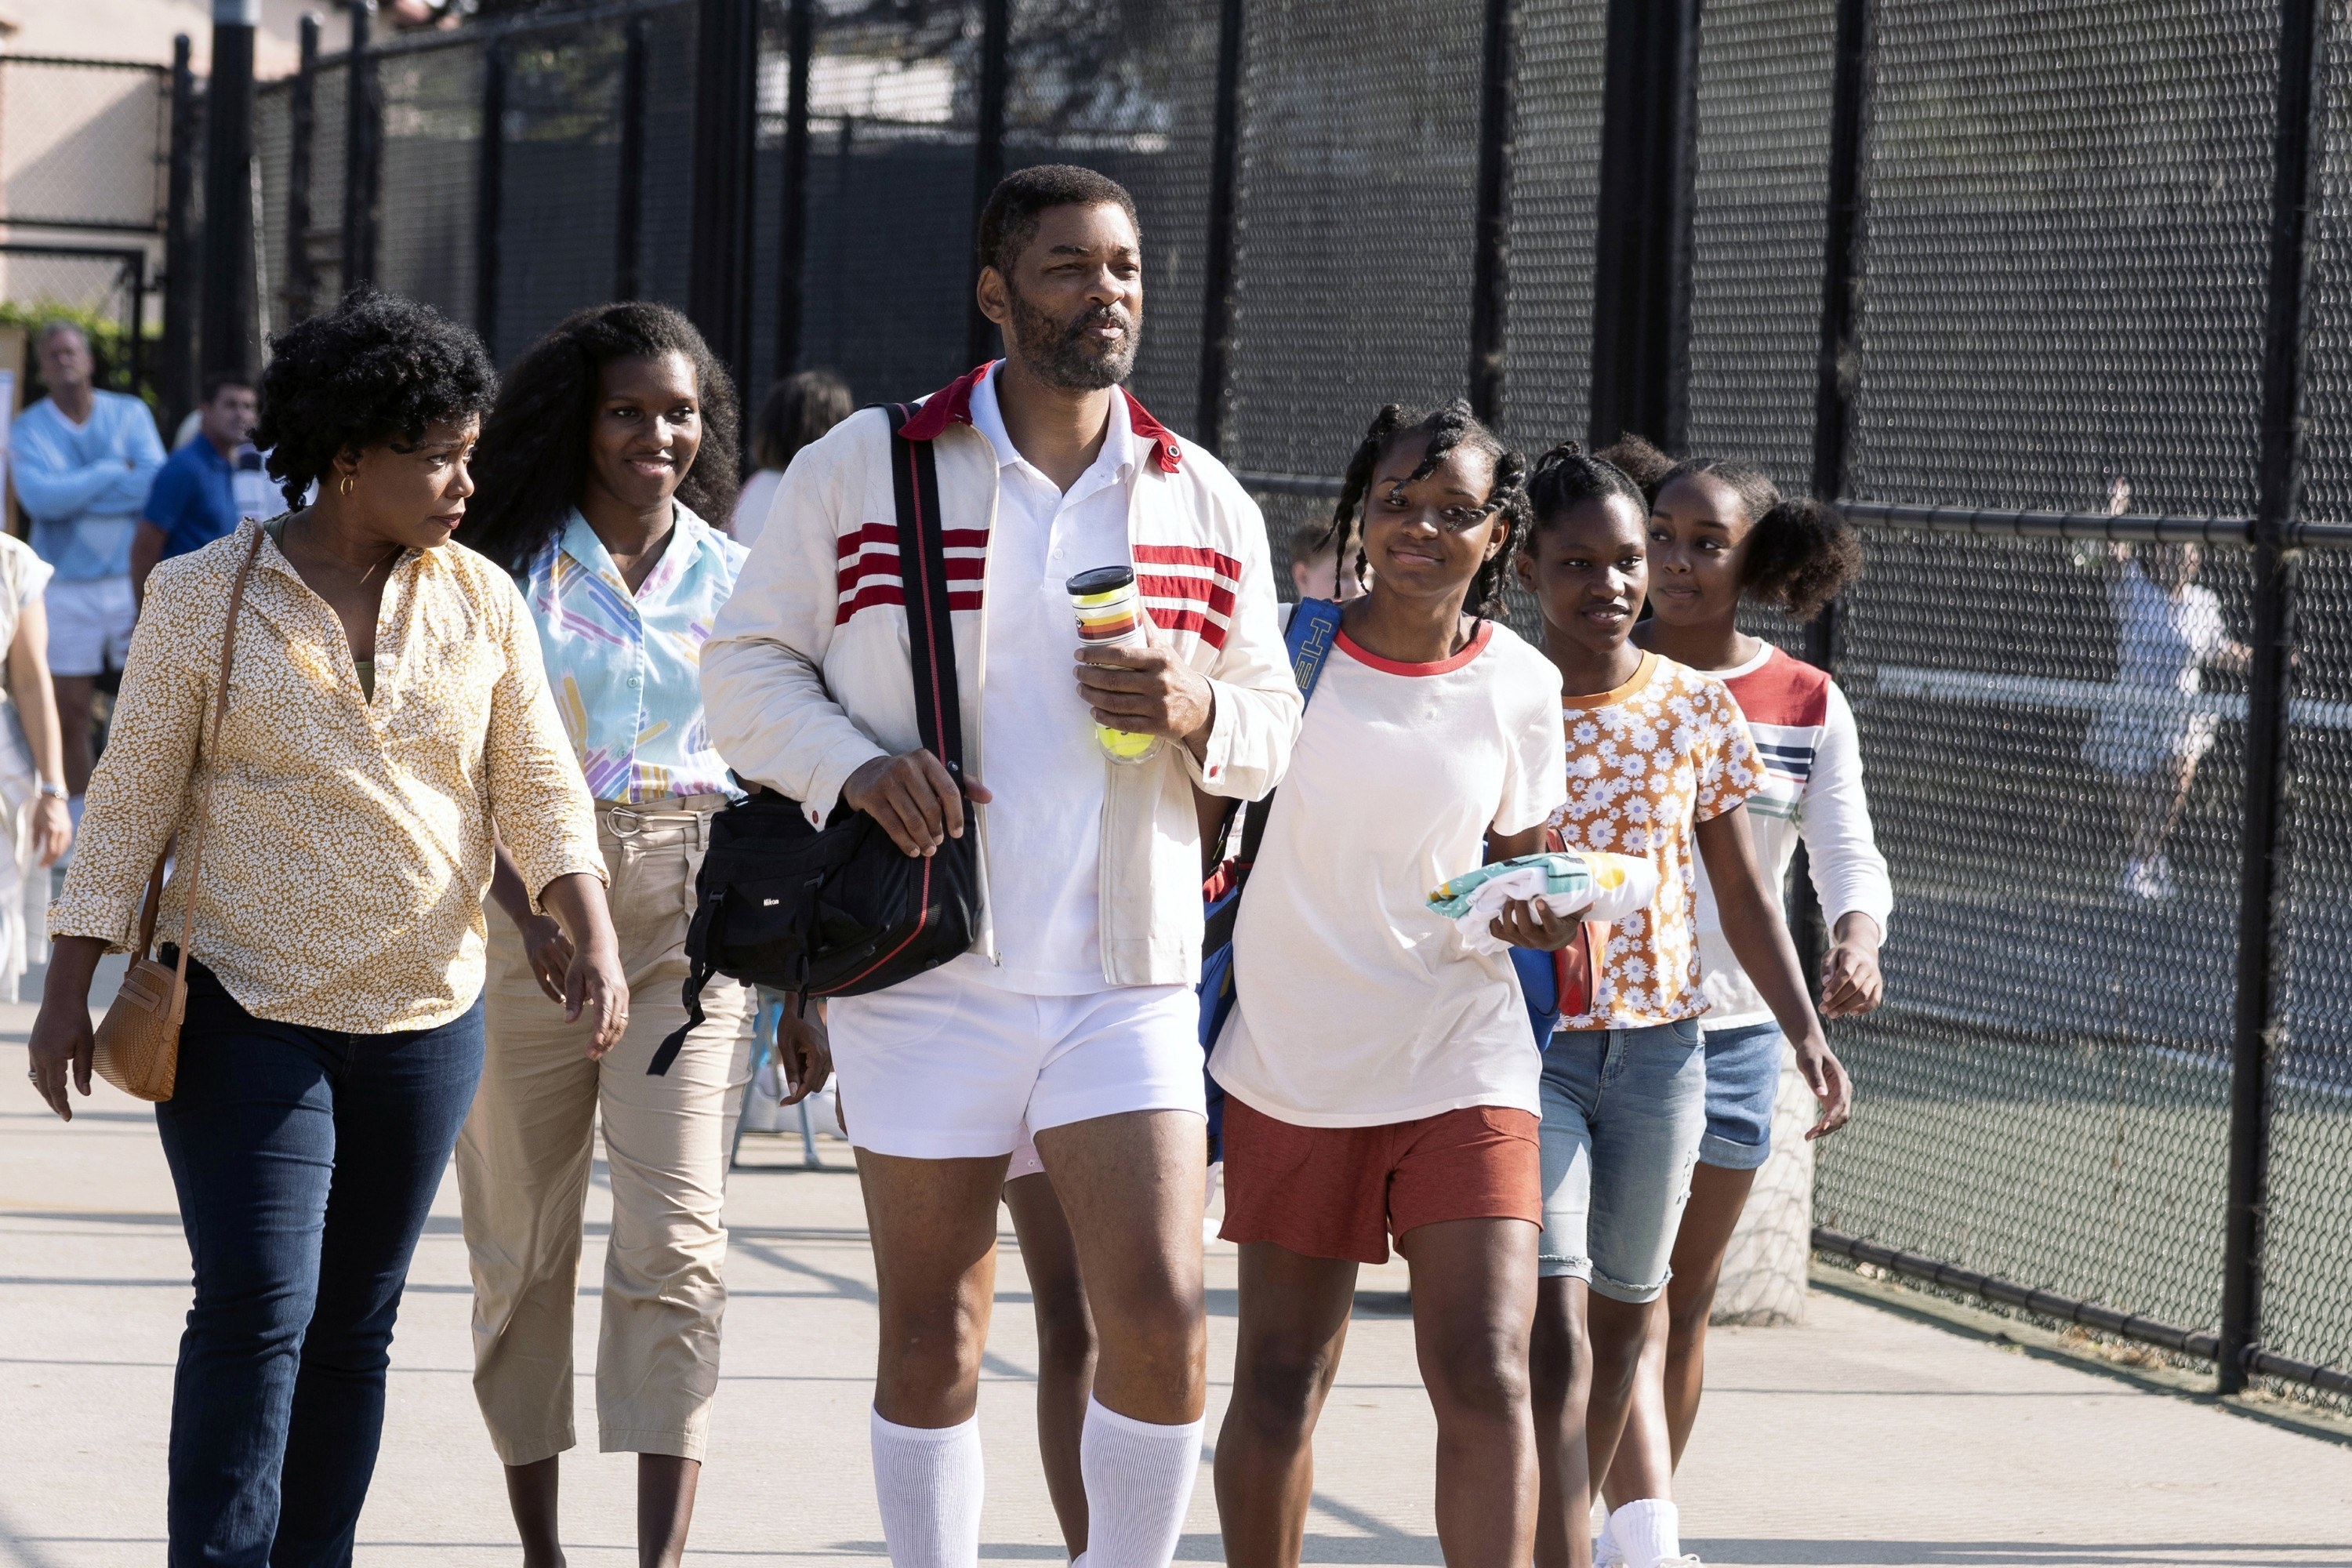 Richard walks with his family outside the tennis courts